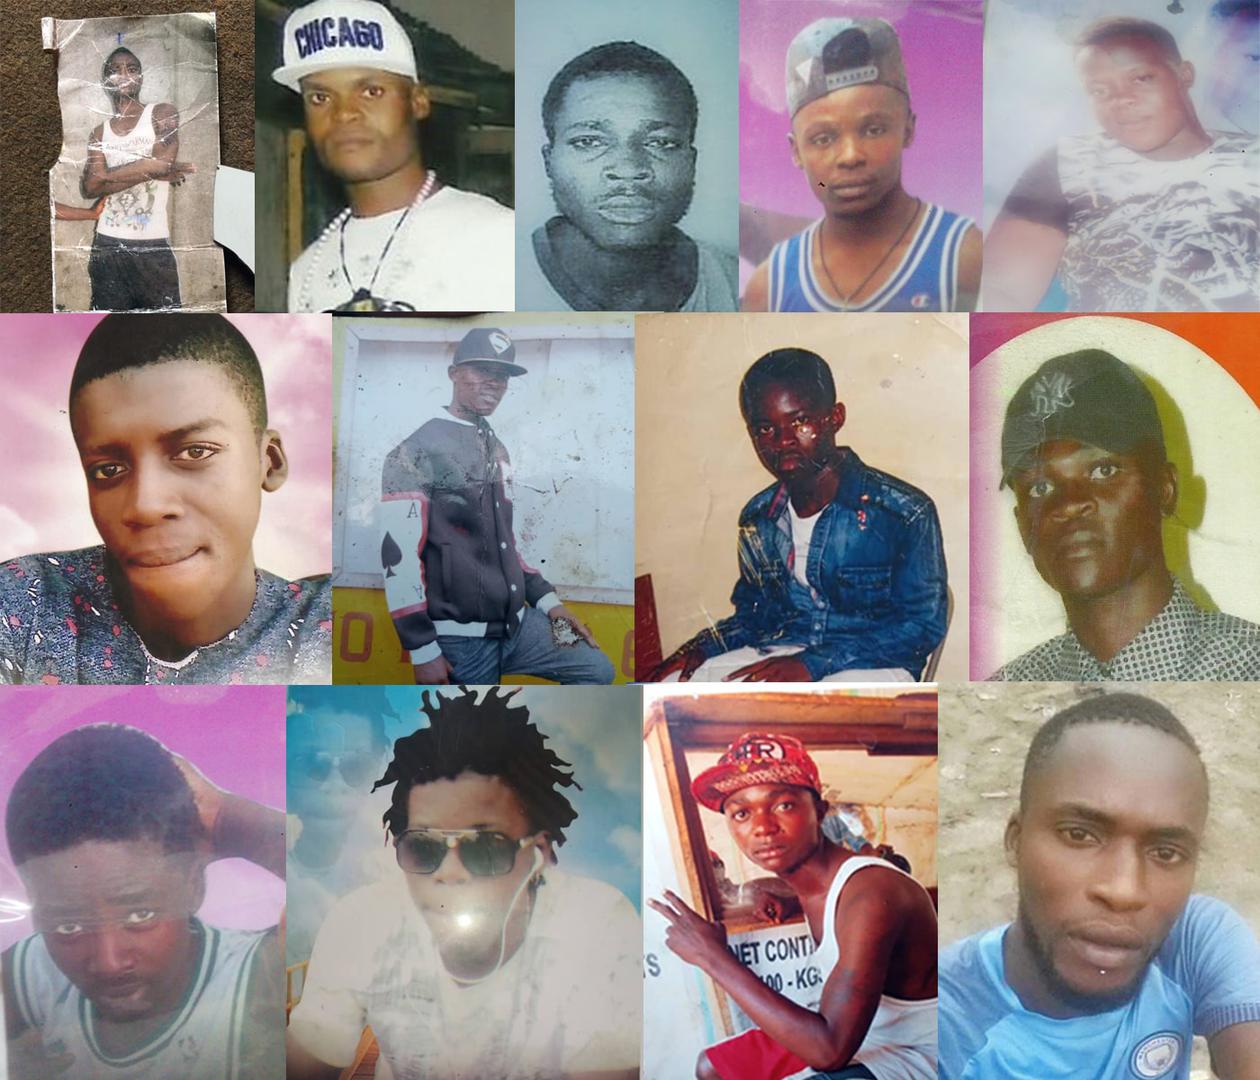 Security forces in the Democratic Republic of Congo summarily killed at least 27 young men and boys and forcibly disappeared 7 others during an anti-crime campaign that began in May 2018. Names of those pictured have been withheld because of security conc